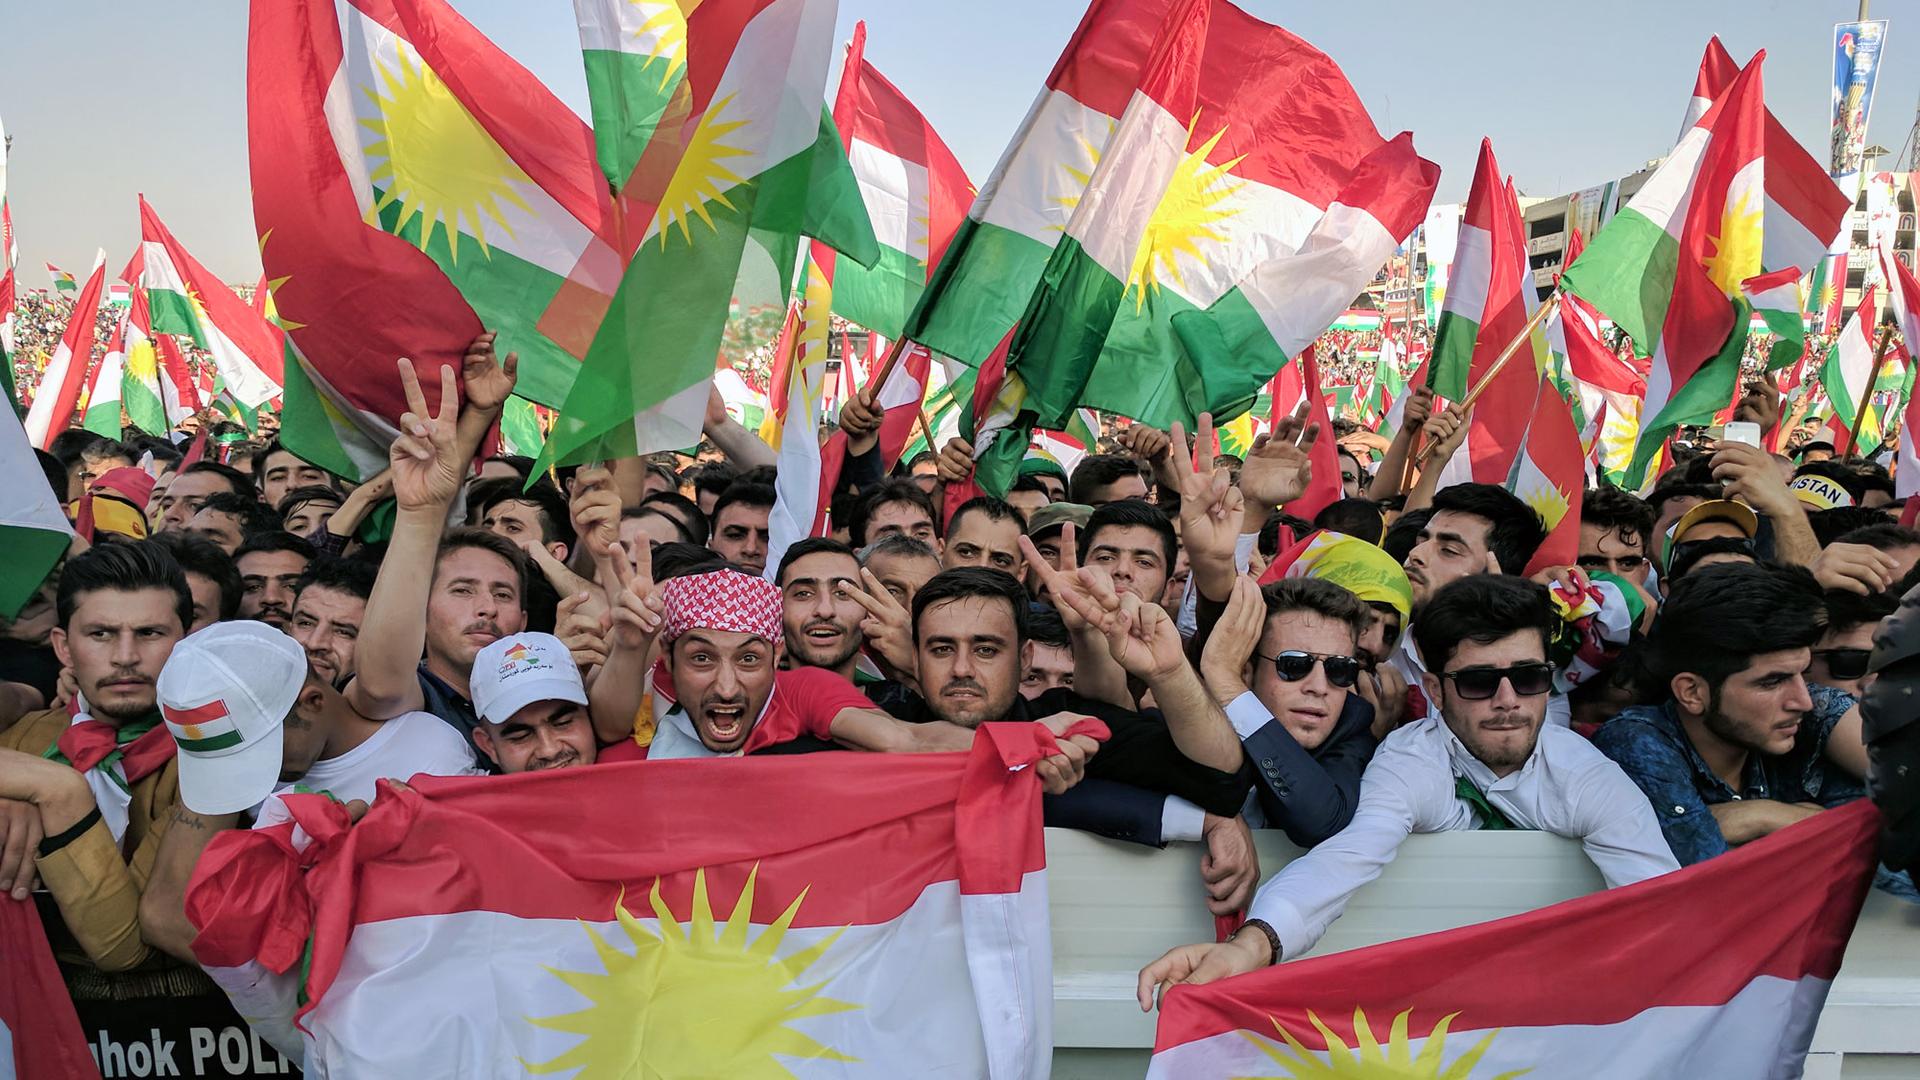 Tens of thousands turn out for a rally in Erbil, northern Iraq, in support of Kurdistan's independence referendum.